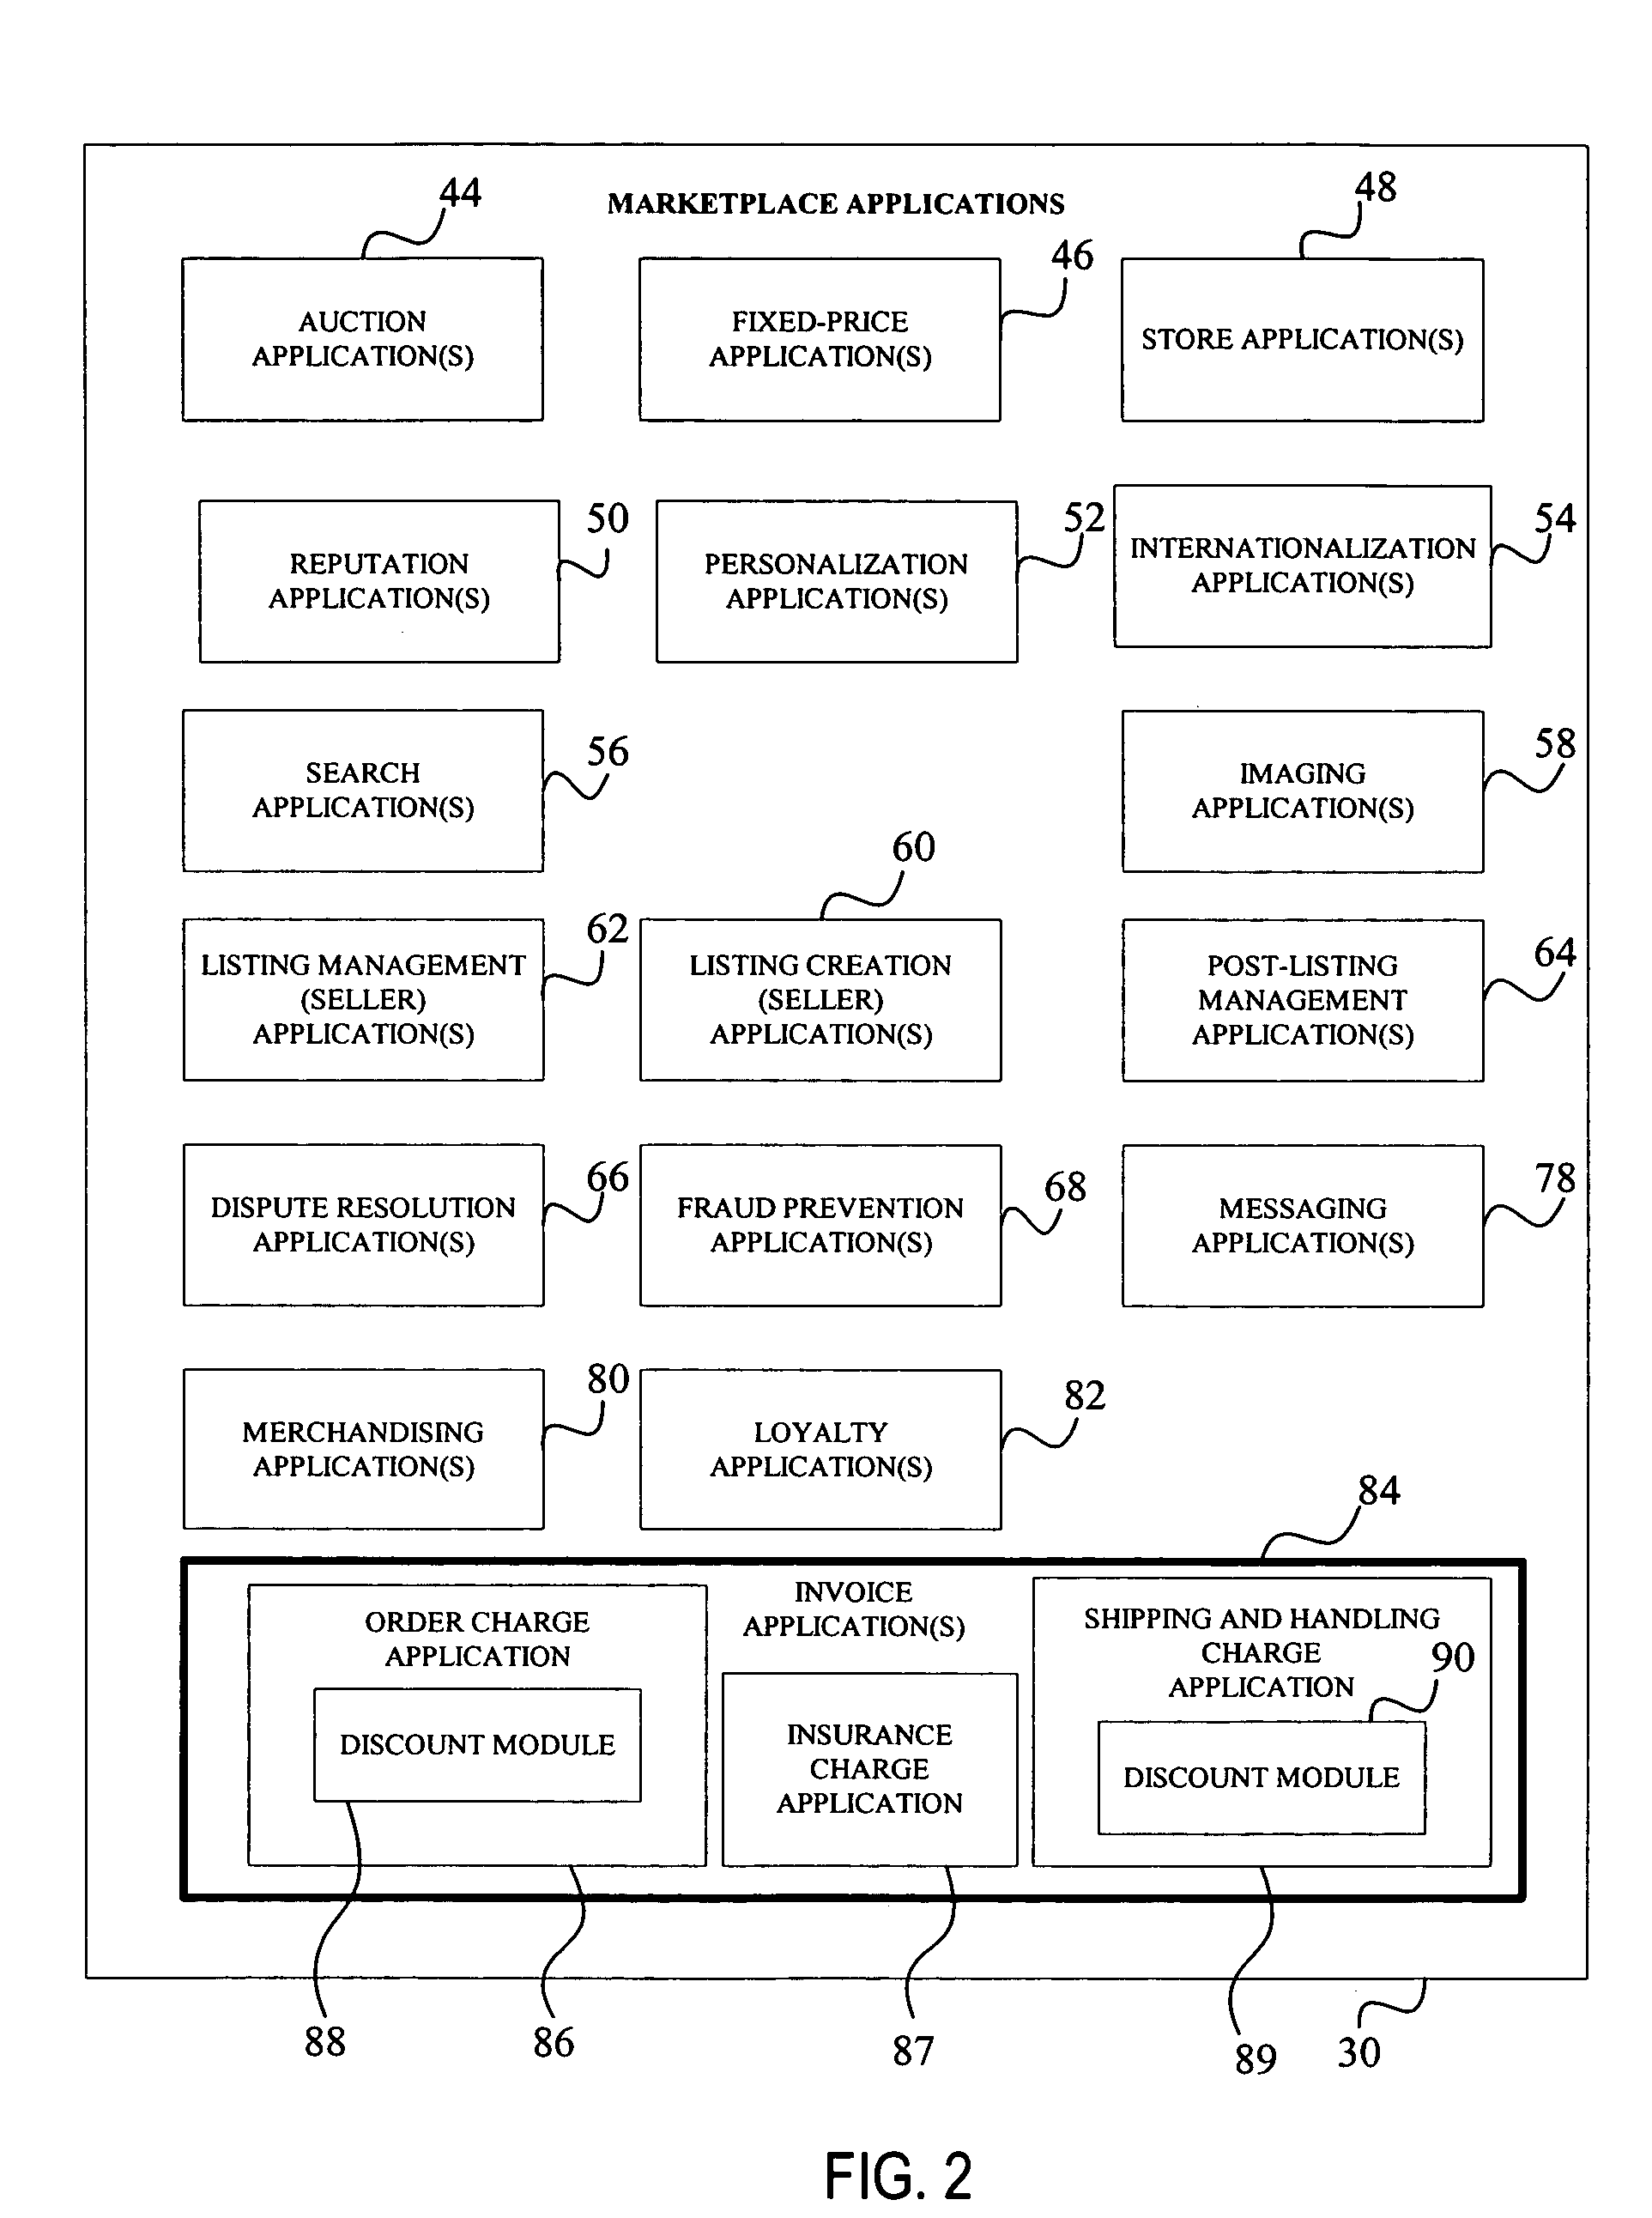 Method and apparatus to facilitate generation of invoices combining multiple transactions established utilizing a multi-seller network-based marketplace